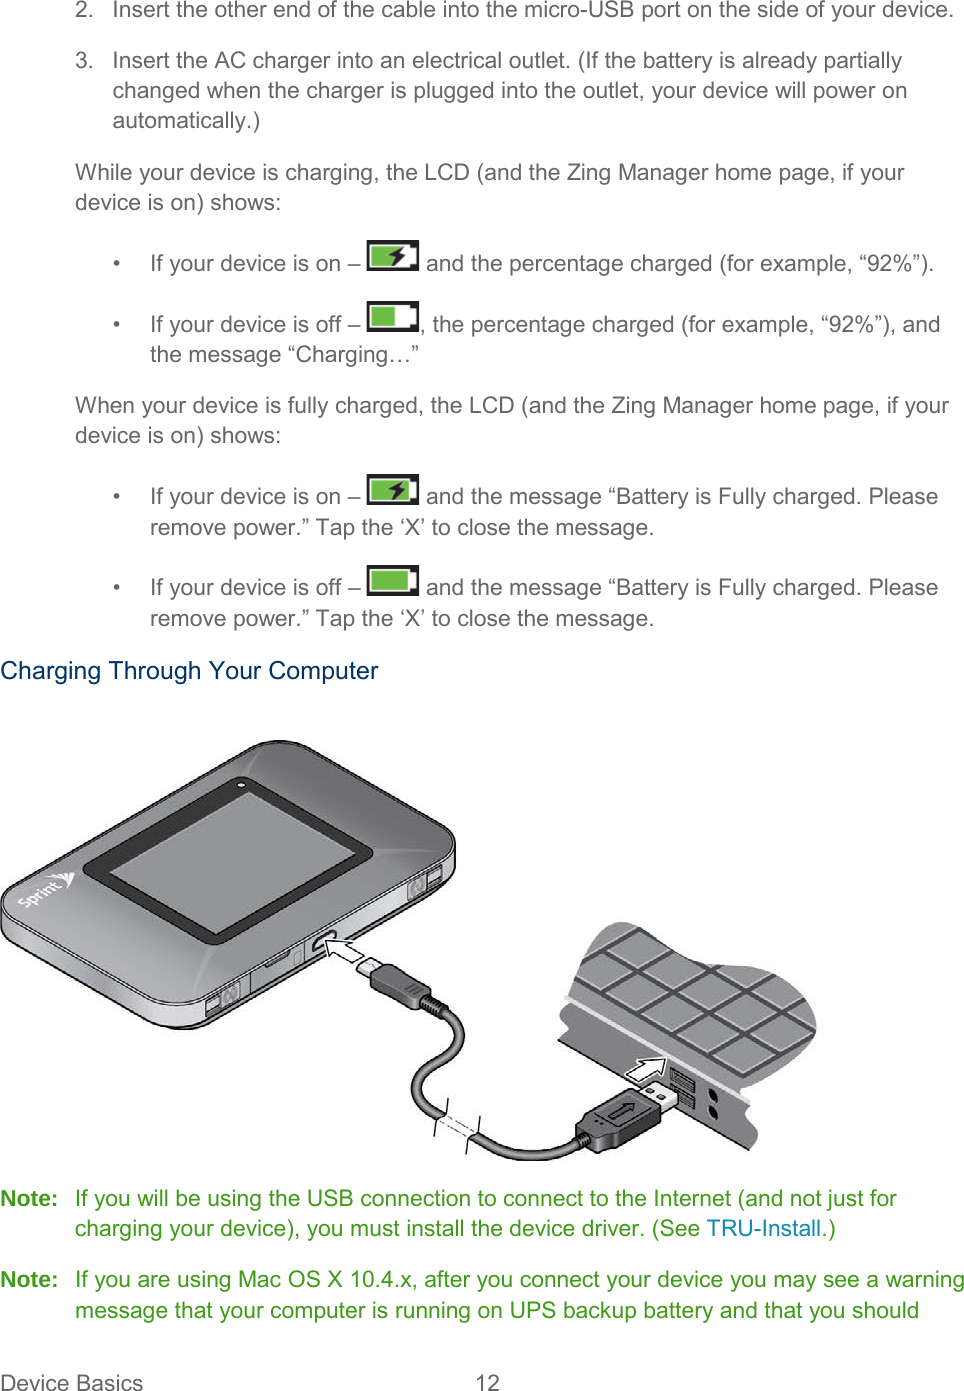 2. Insert the other end of the cable into the micro-USB port on the side of your device. 3. Insert the AC charger into an electrical outlet. (If the battery is already partially changed when the charger is plugged into the outlet, your device will power on automatically.) While your device is charging, the LCD (and the Zing Manager home page, if your device is on) shows: •  If your device is on –   and the percentage charged (for example, “92%”). •  If your device is off –  , the percentage charged (for example, “92%”), and the message “Charging…” When your device is fully charged, the LCD (and the Zing Manager home page, if your device is on) shows: •  If your device is on –   and the message “Battery is Fully charged. Please remove power.” Tap the ‘X’ to close the message. •  If your device is off –   and the message “Battery is Fully charged. Please remove power.” Tap the ‘X’ to close the message. Charging Through Your Computer   Note: If you will be using the USB connection to connect to the Internet (and not just for charging your device), you must install the device driver. (See TRU-Install.) Note: If you are using Mac OS X 10.4.x, after you connect your device you may see a warning message that your computer is running on UPS backup battery and that you should Device Basics 12   